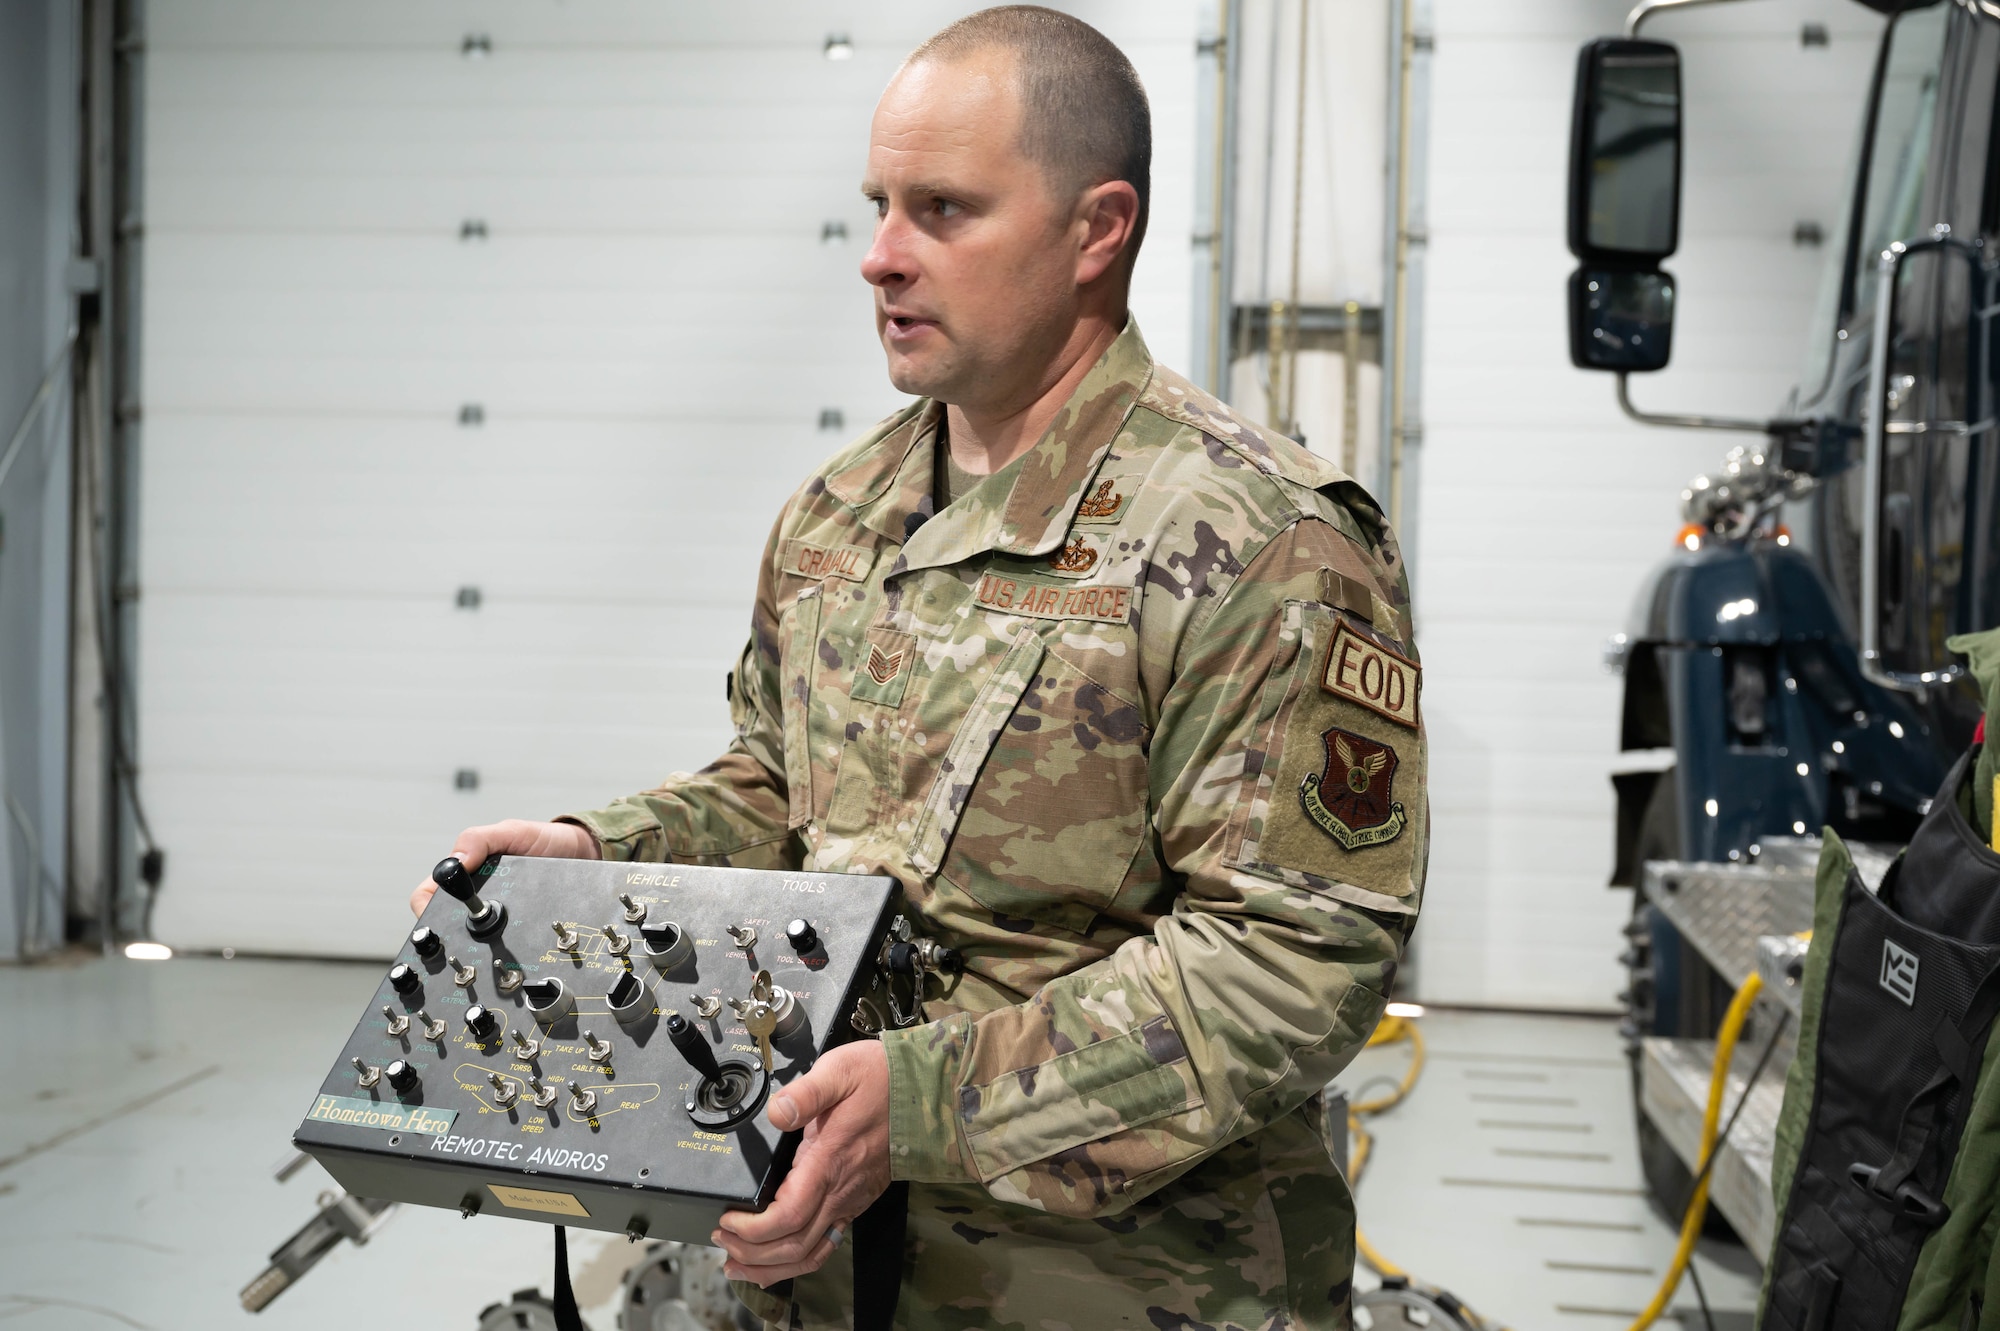 Tech. Sgt. Tristan Crandall, 341st Civil Engineer Squadron explosives ordnance disposal noncommissioned officer in charge of equipment, explains how the old robot remote control used to work June 2, 2021, at Malmstrom Air Force Base, Mont.